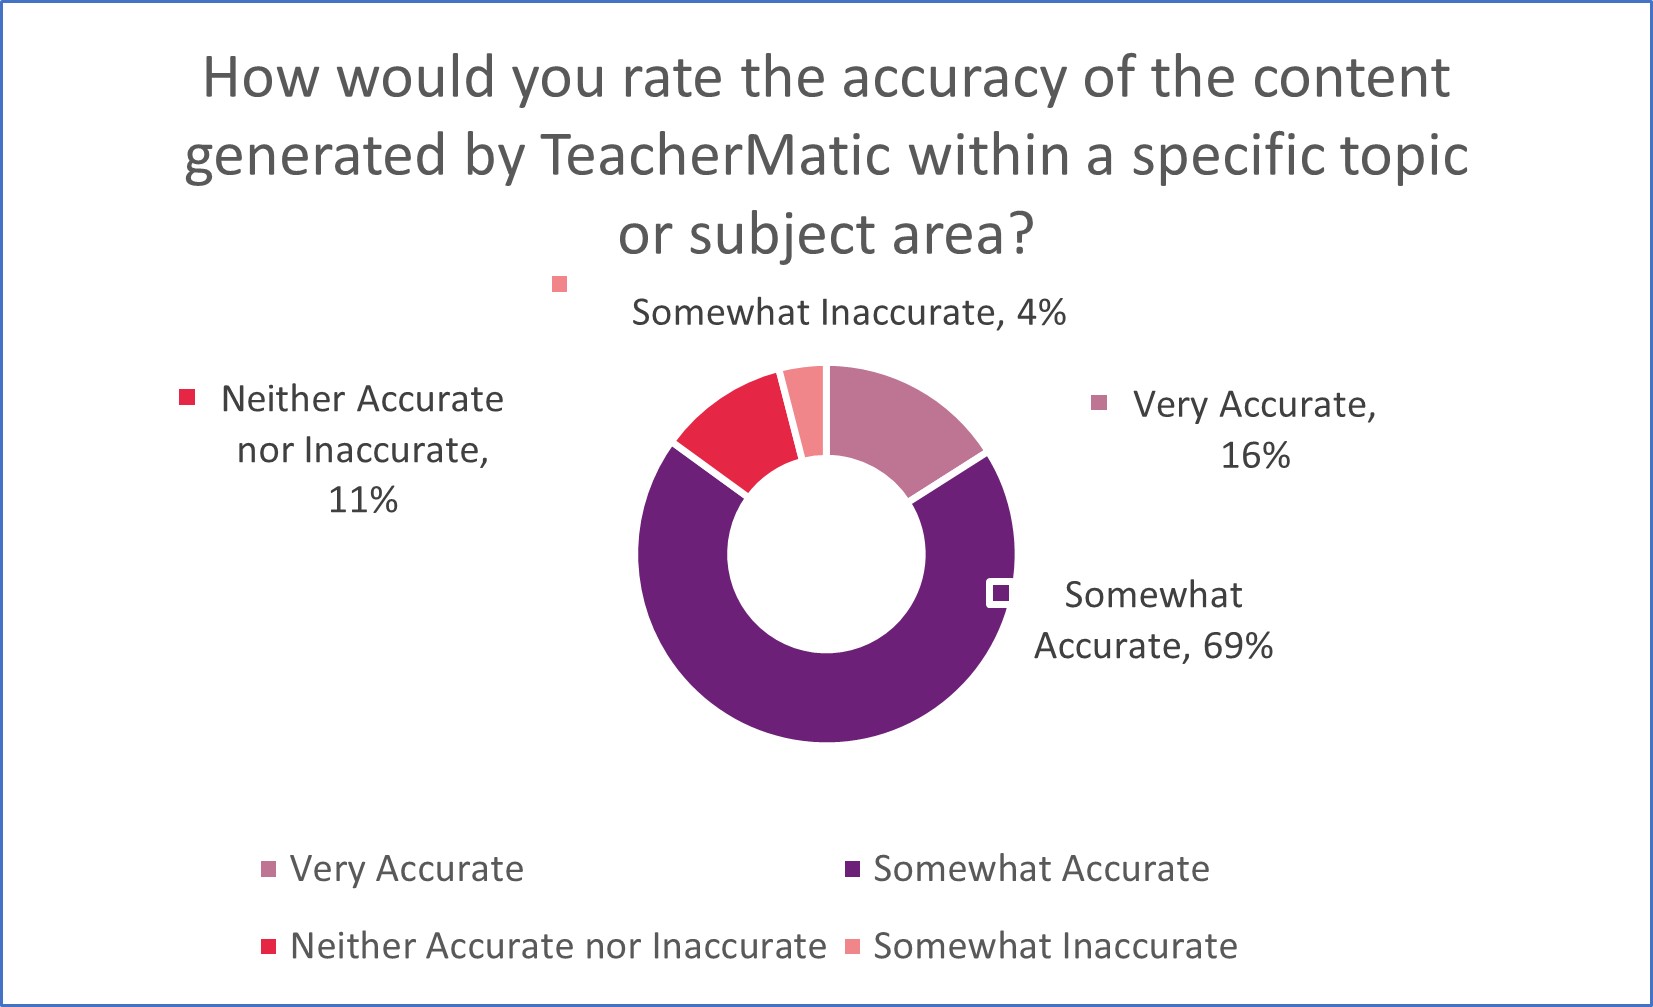 A pie chart showing how accurate participants felt TeacherMatic is at generating content within a specific subject or area. Feedback showed 16% said very accurate, 69% somewhat accurate, 11% neither accurate or nor inaccurate and 4% said somewhat inaccurate. 